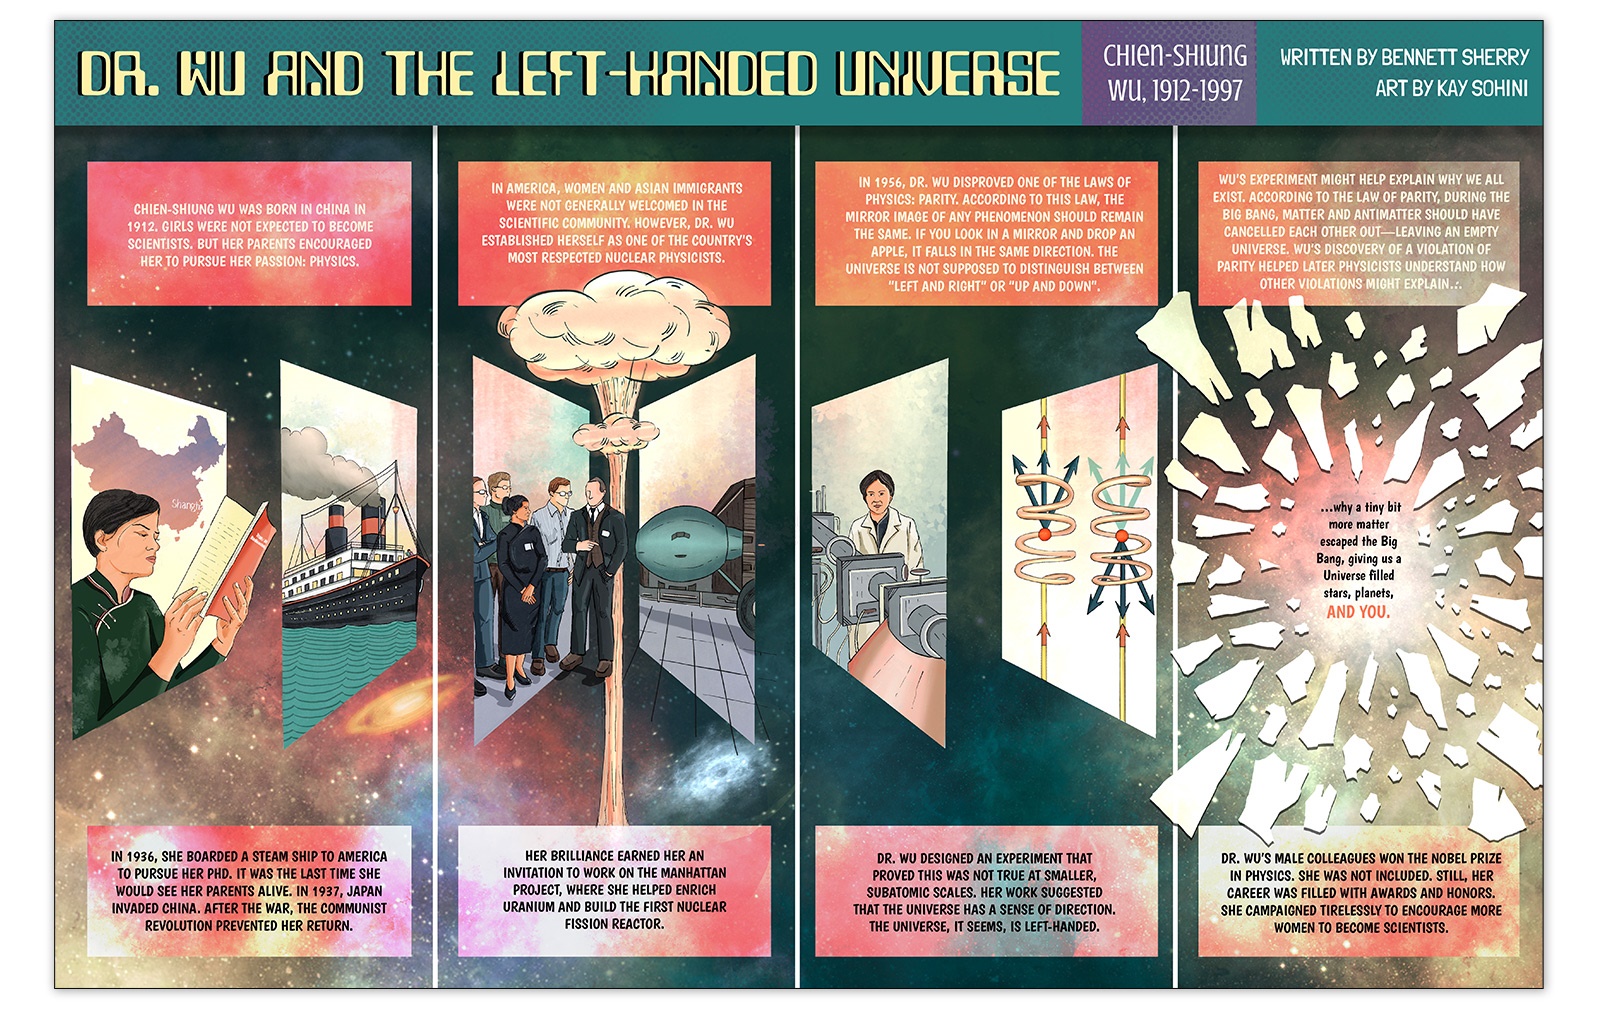 Dr. Wu and the Left-Handed Universe: Chien-Shiung Wu graphic biography preview